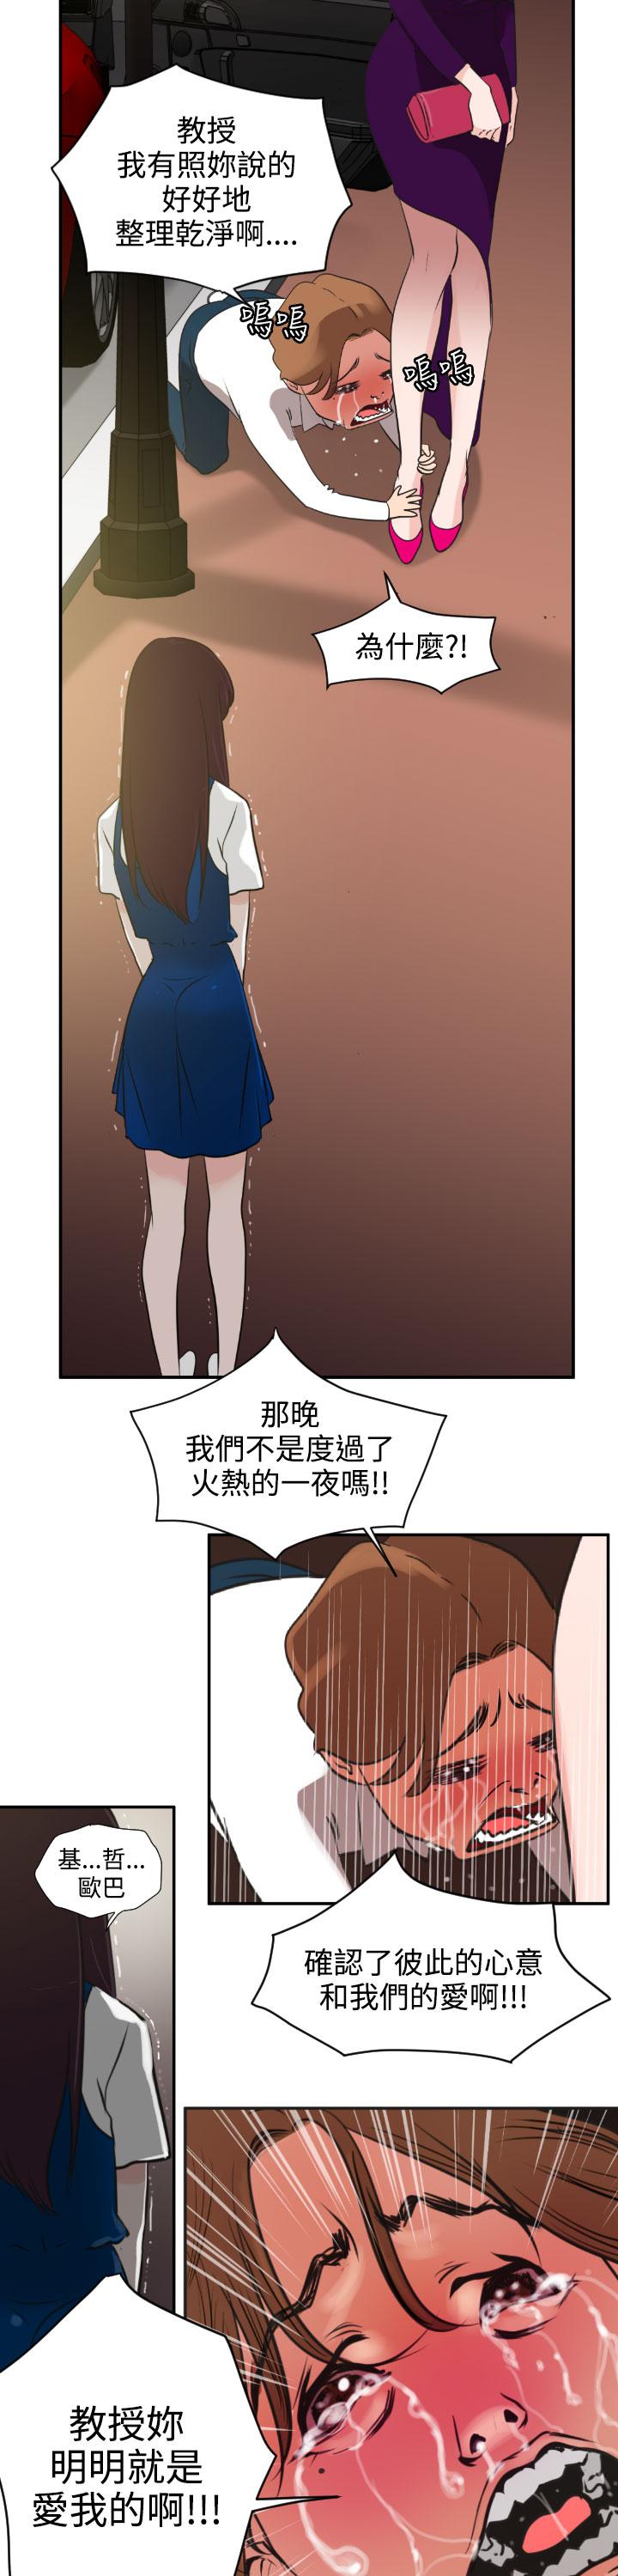 Desire King (慾求王) Ch.1-16 (chinese) 75